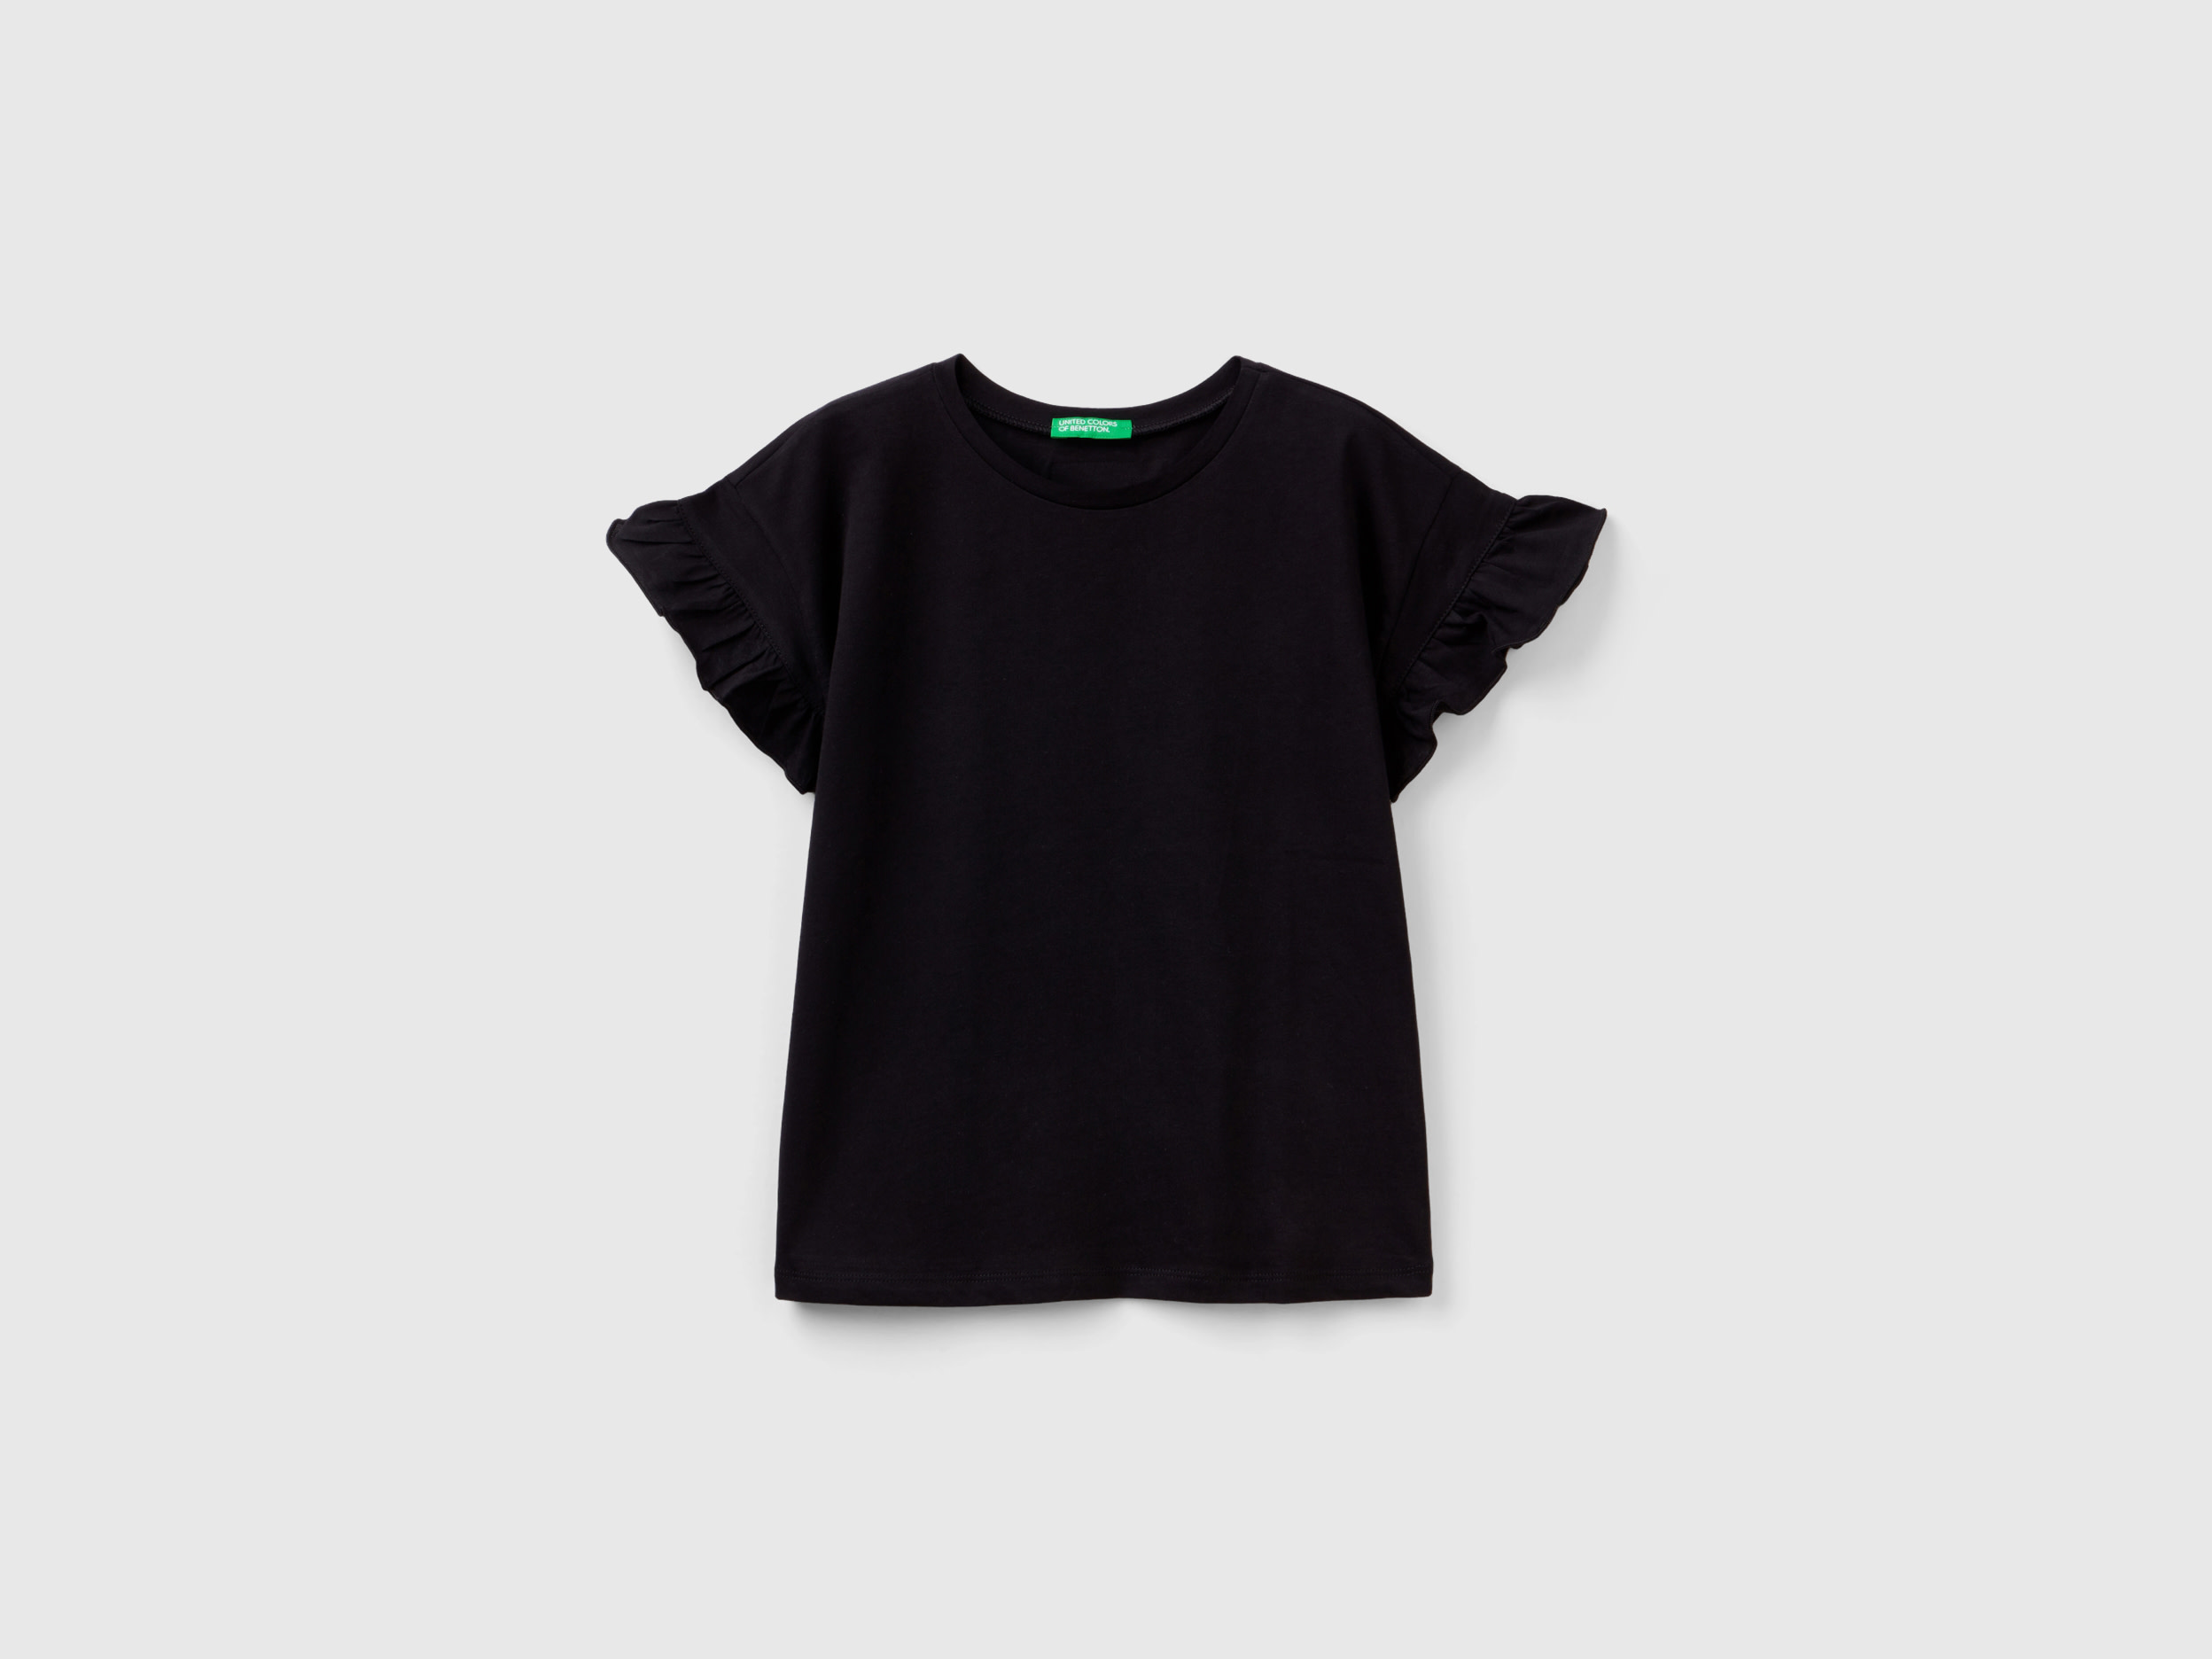 Benetton, Short Sleeve T-shirt With Rouches, size 2XL, Black, Kids